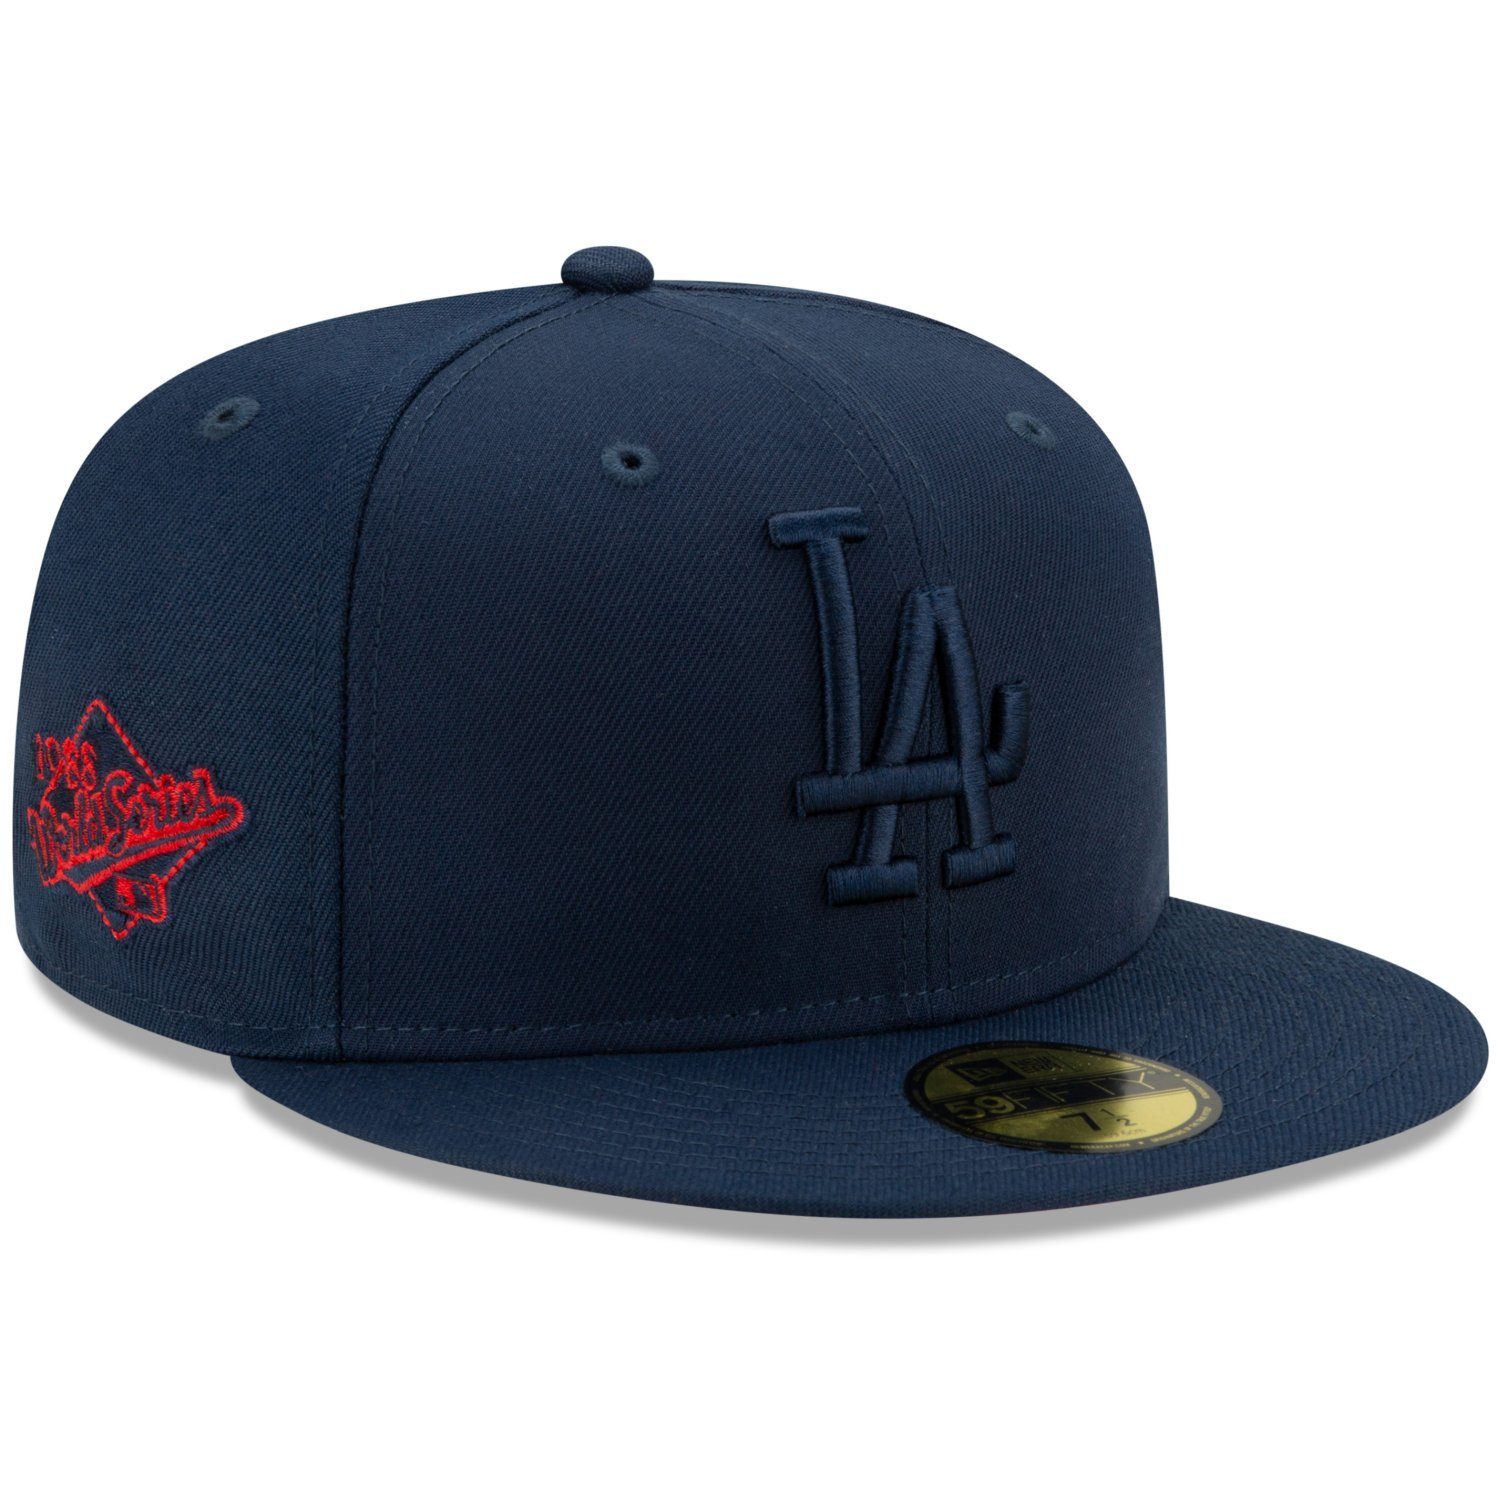 New Era Fitted Cap 59Fifty MLB WORLD SERIES Los Angeles Dodgers